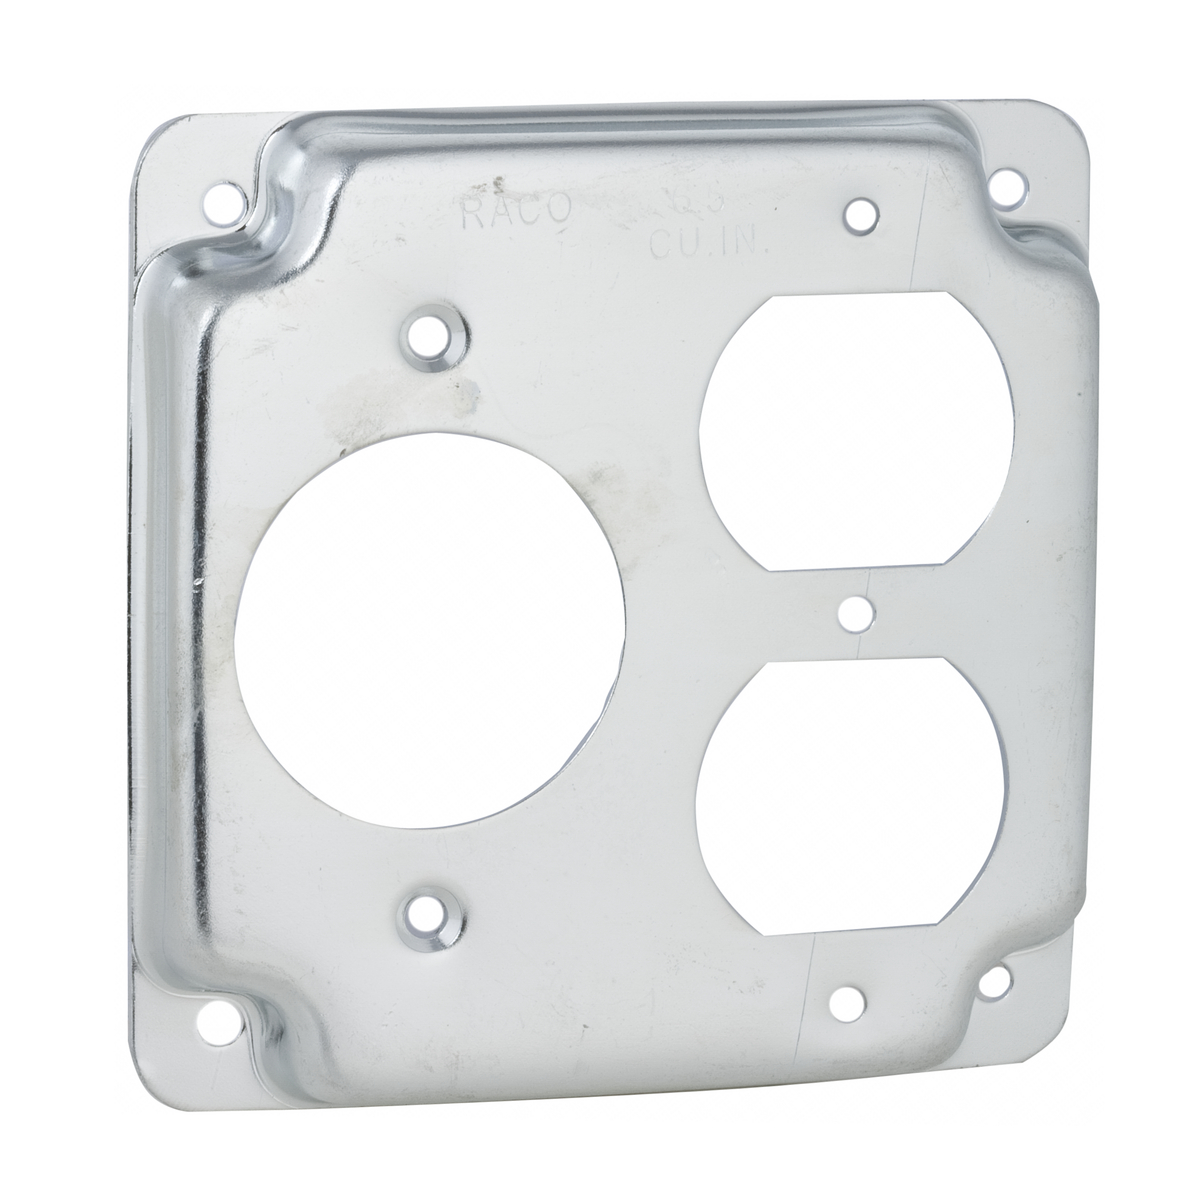 20a metal outlet cover 831C Raco Box Cover 1Dplx & 1.62 Hole 